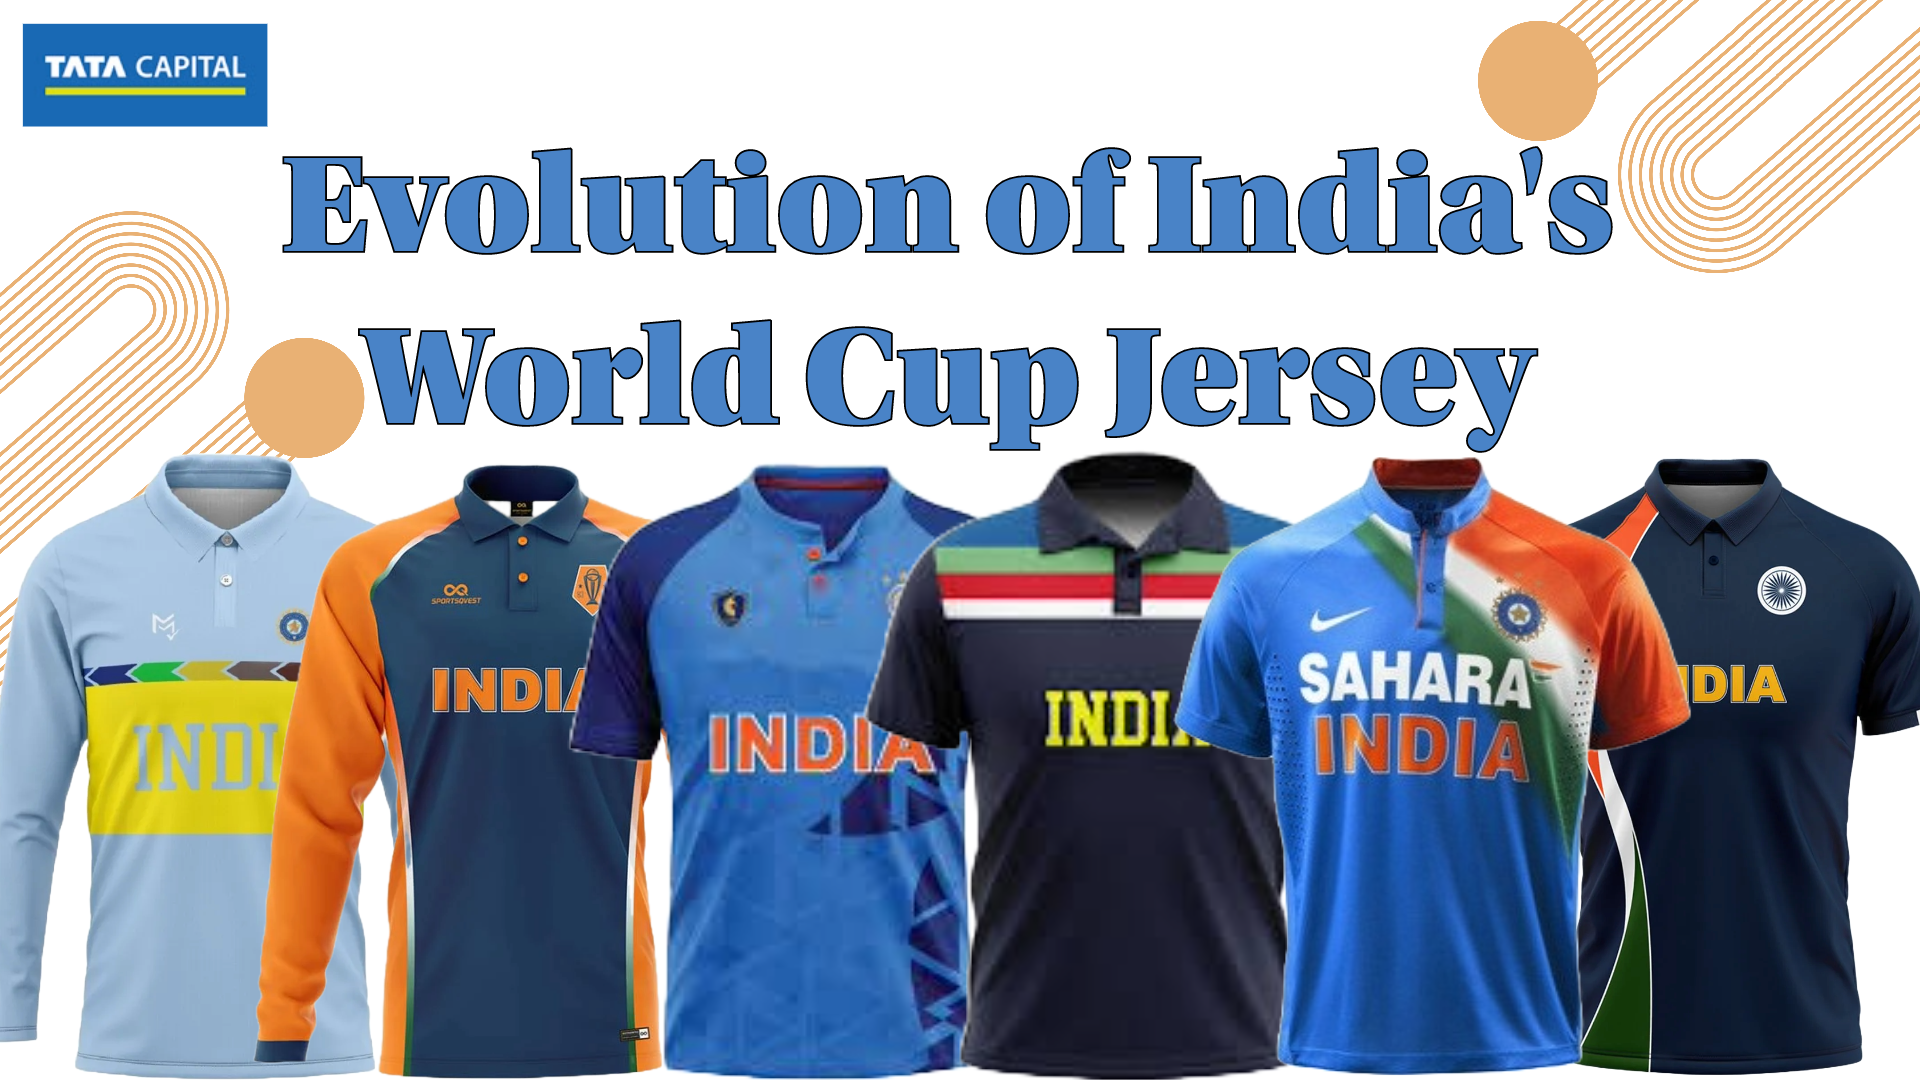 From White Kits to Vibrant Blues: Tracing the Evolution of India’s World Cup Jersey (1992-2023)